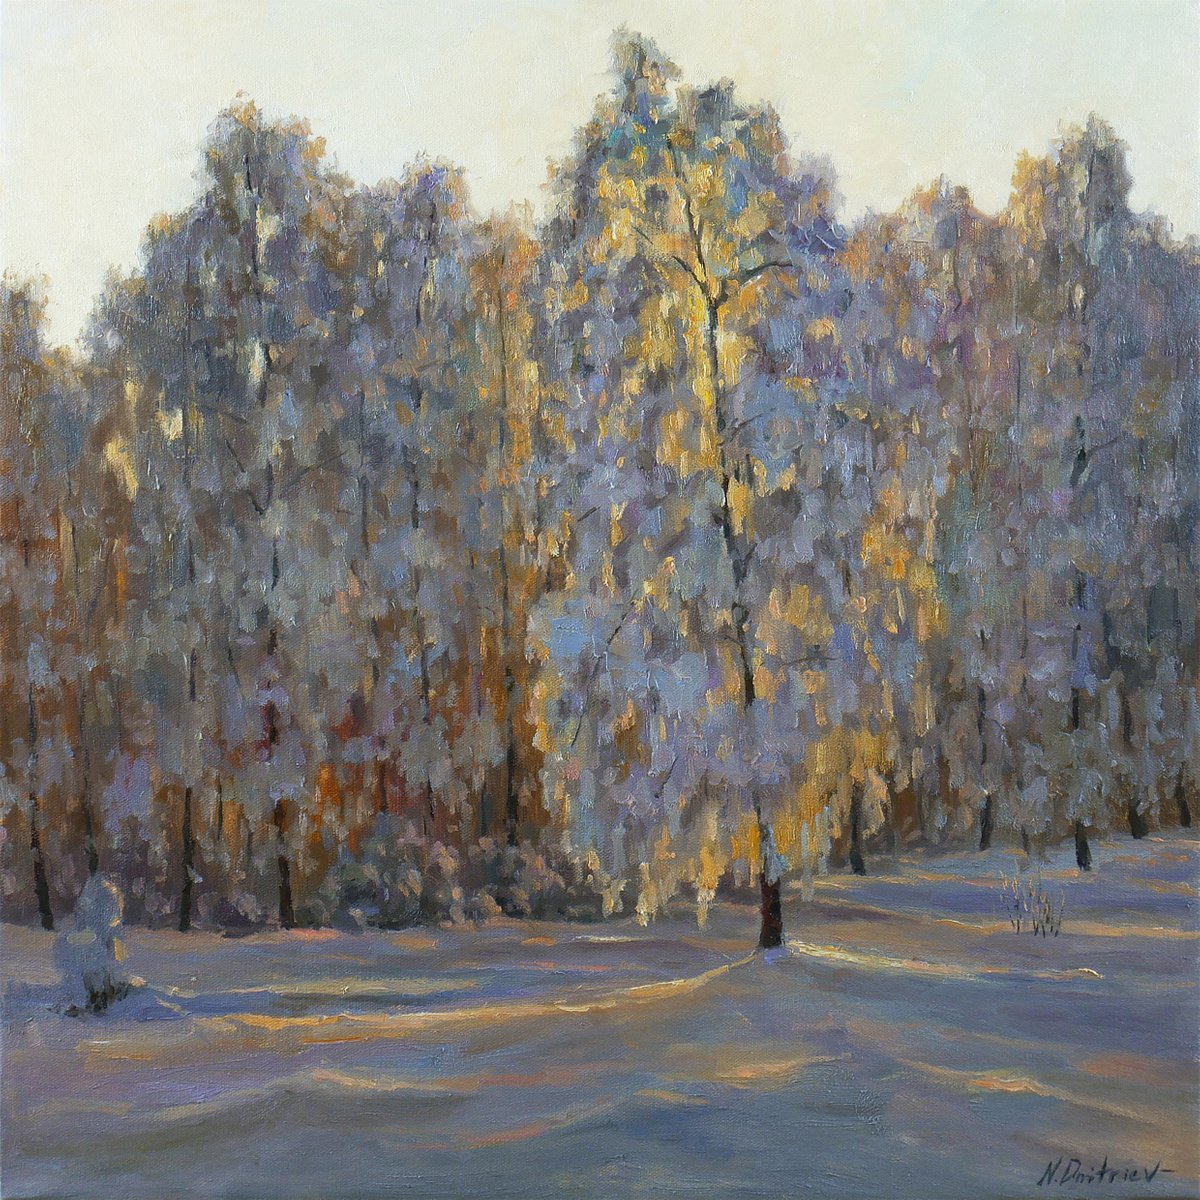 Sunlight Through The Trees- winter landscape painting by Nikolay Dmitriev